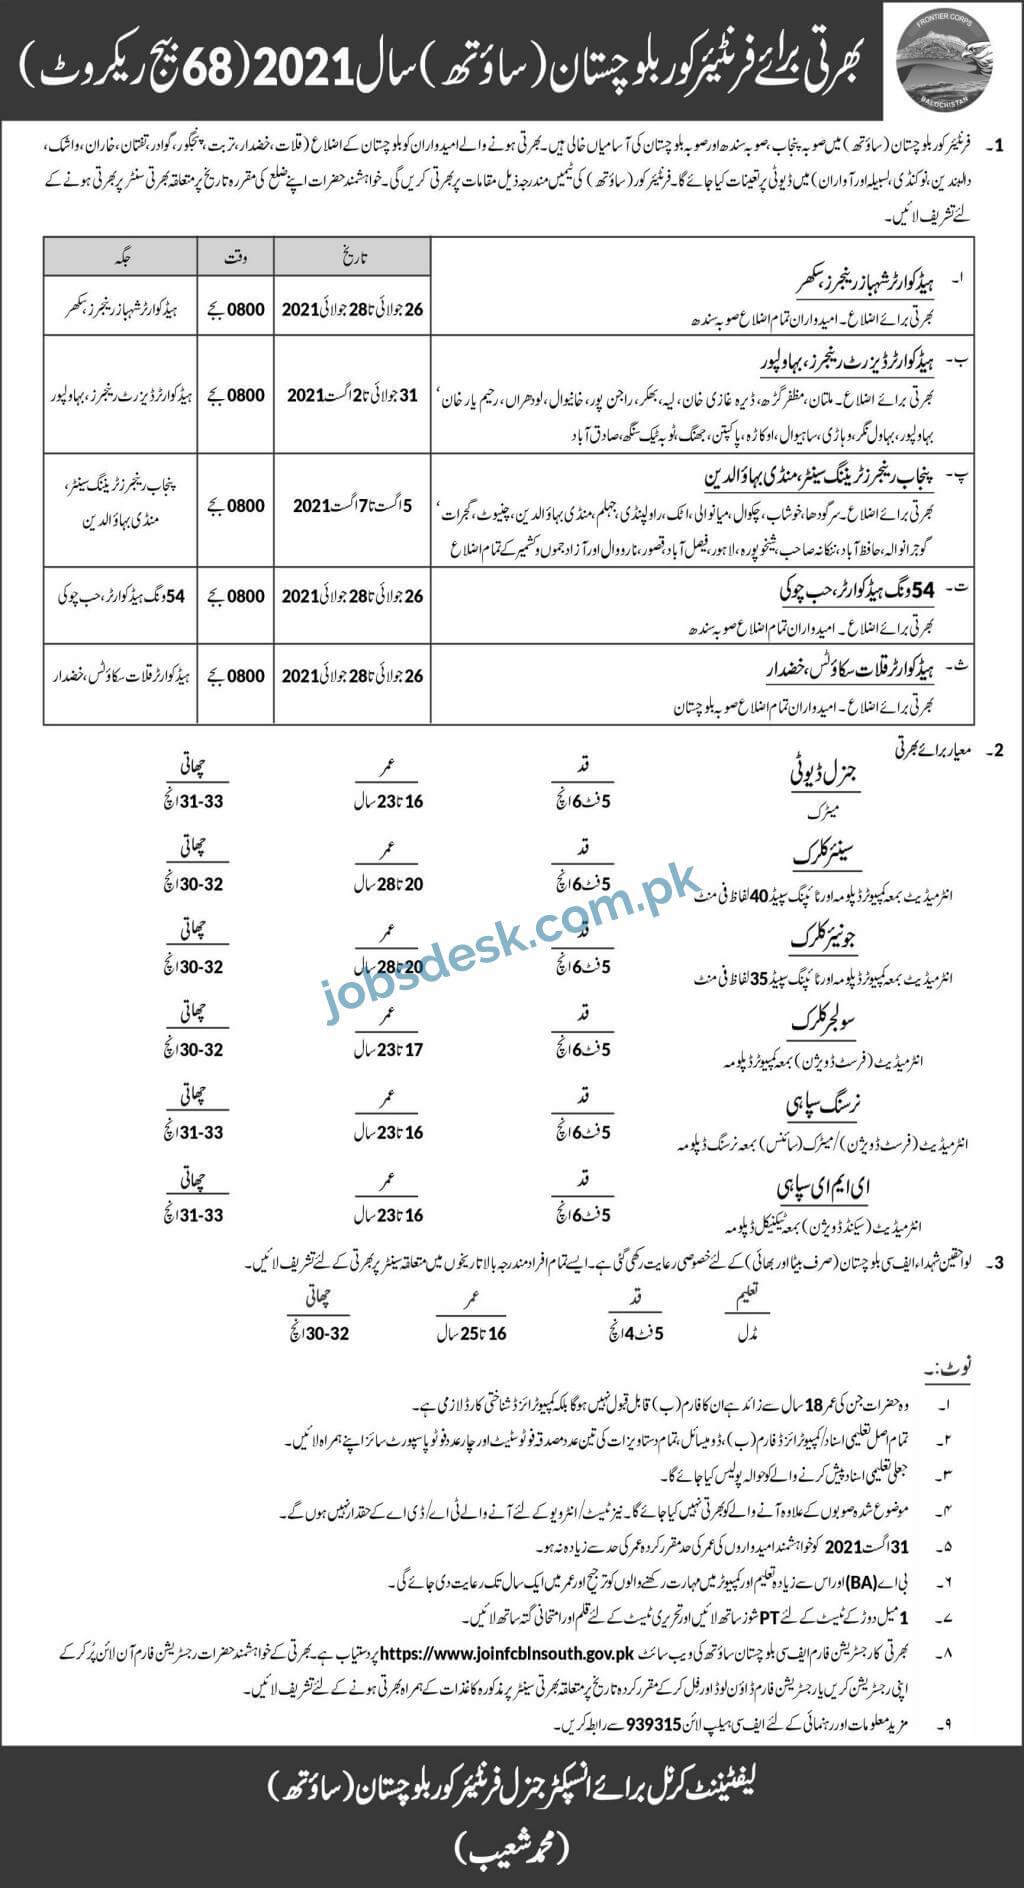 Frontier Corps Jobs in Balochistan (South) | Join Pak Army 2021